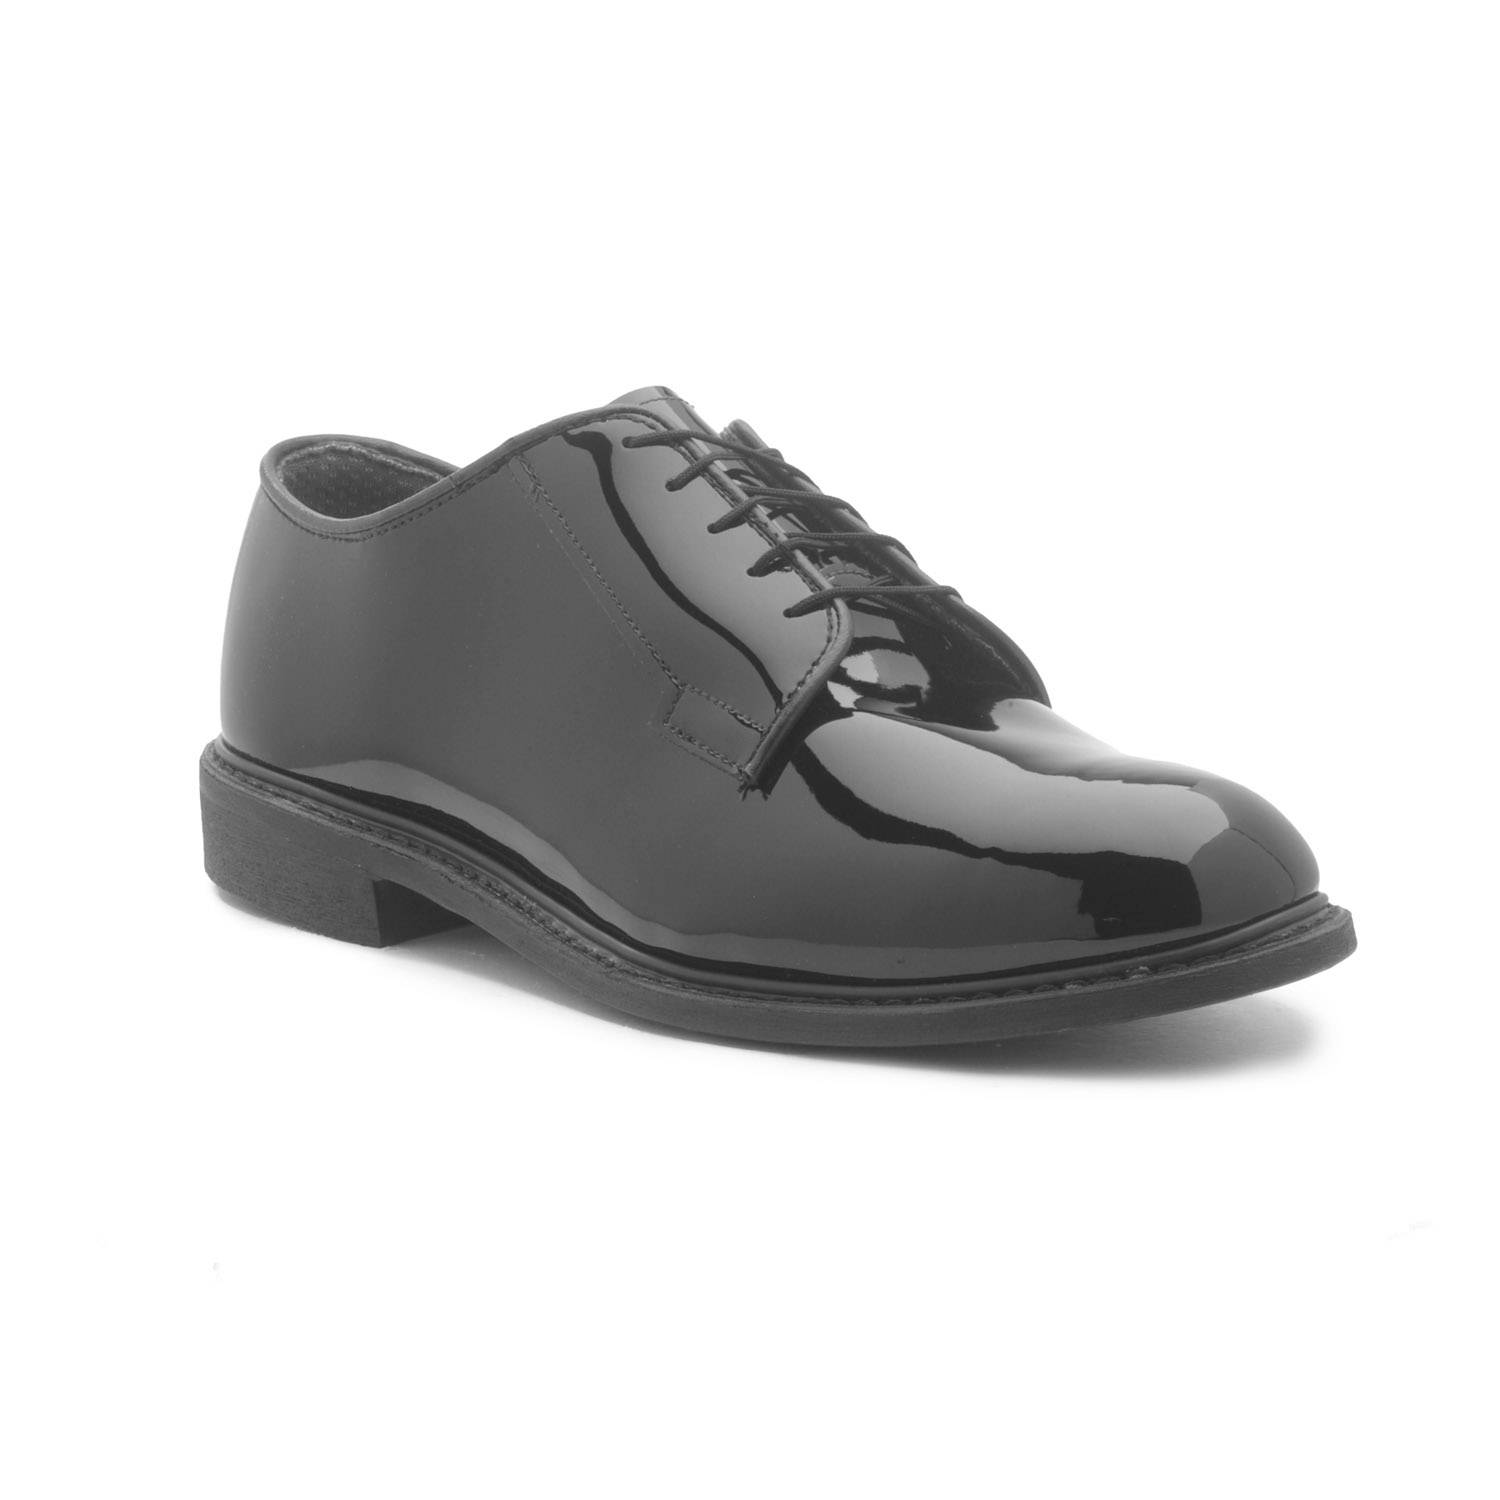 Bates High Gloss Leather Sole Oxford